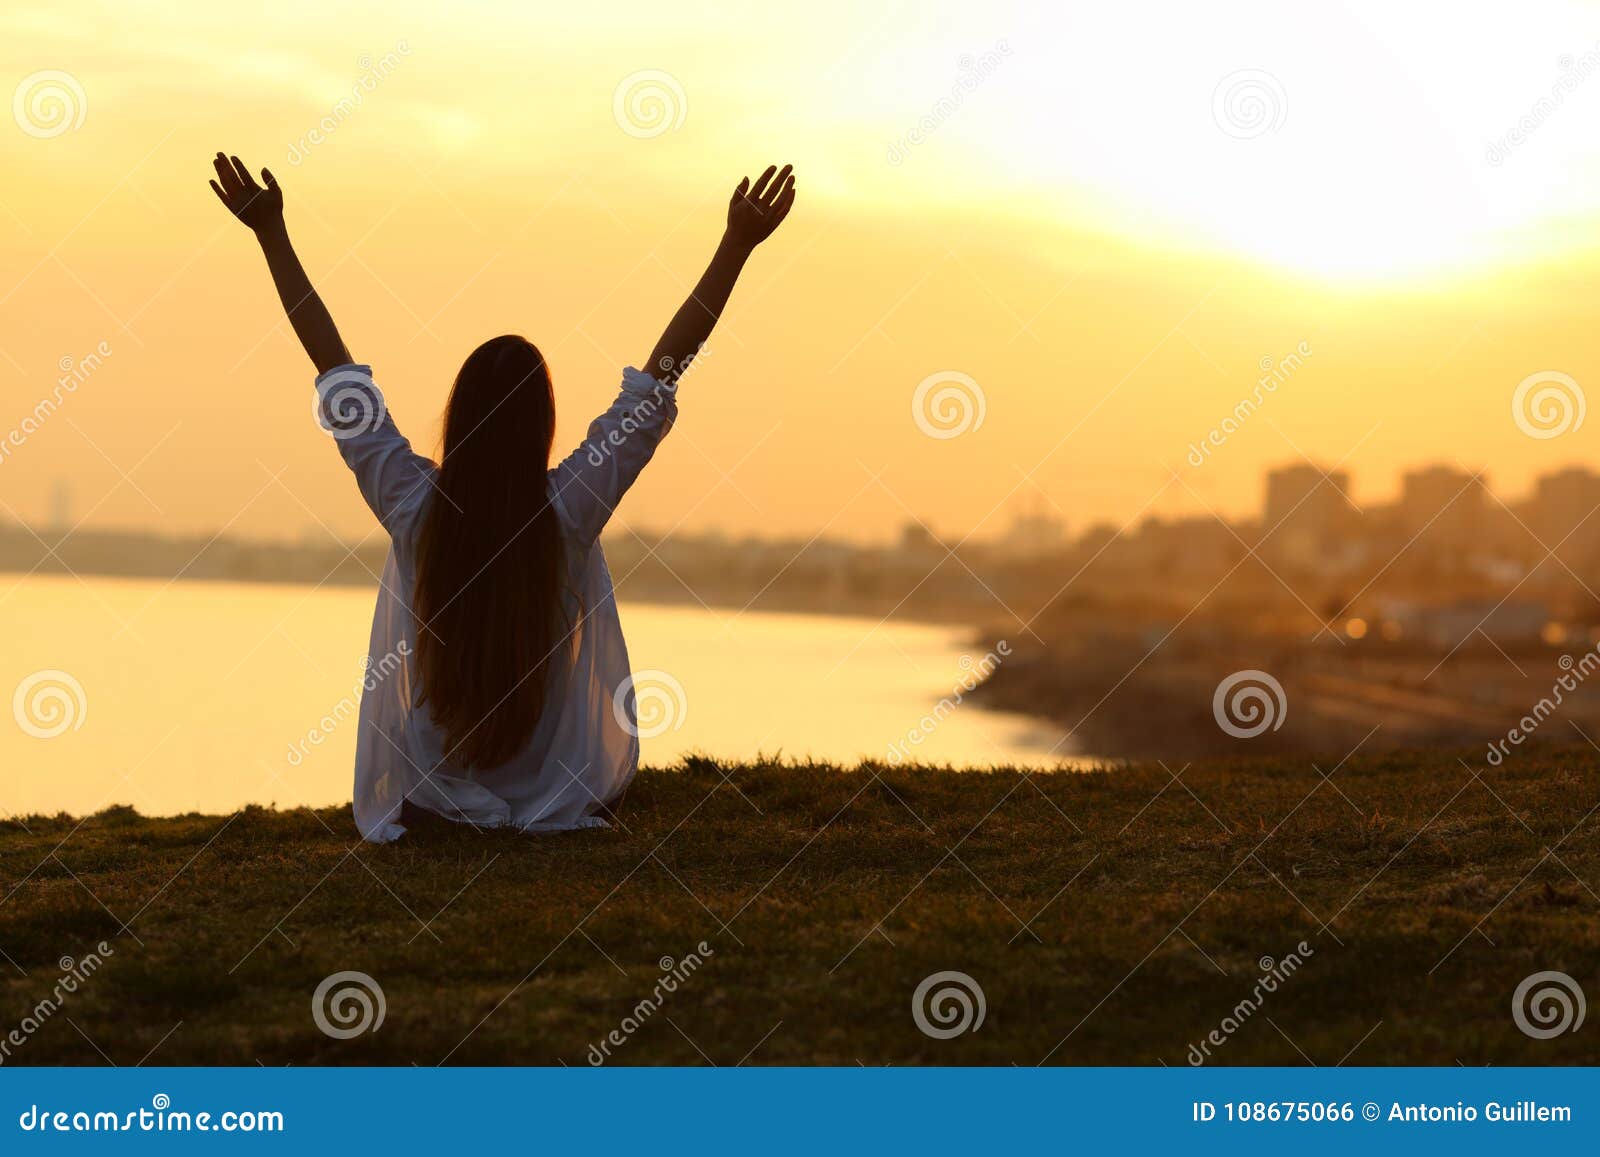 happy woman seeing city at sunset and raising arms